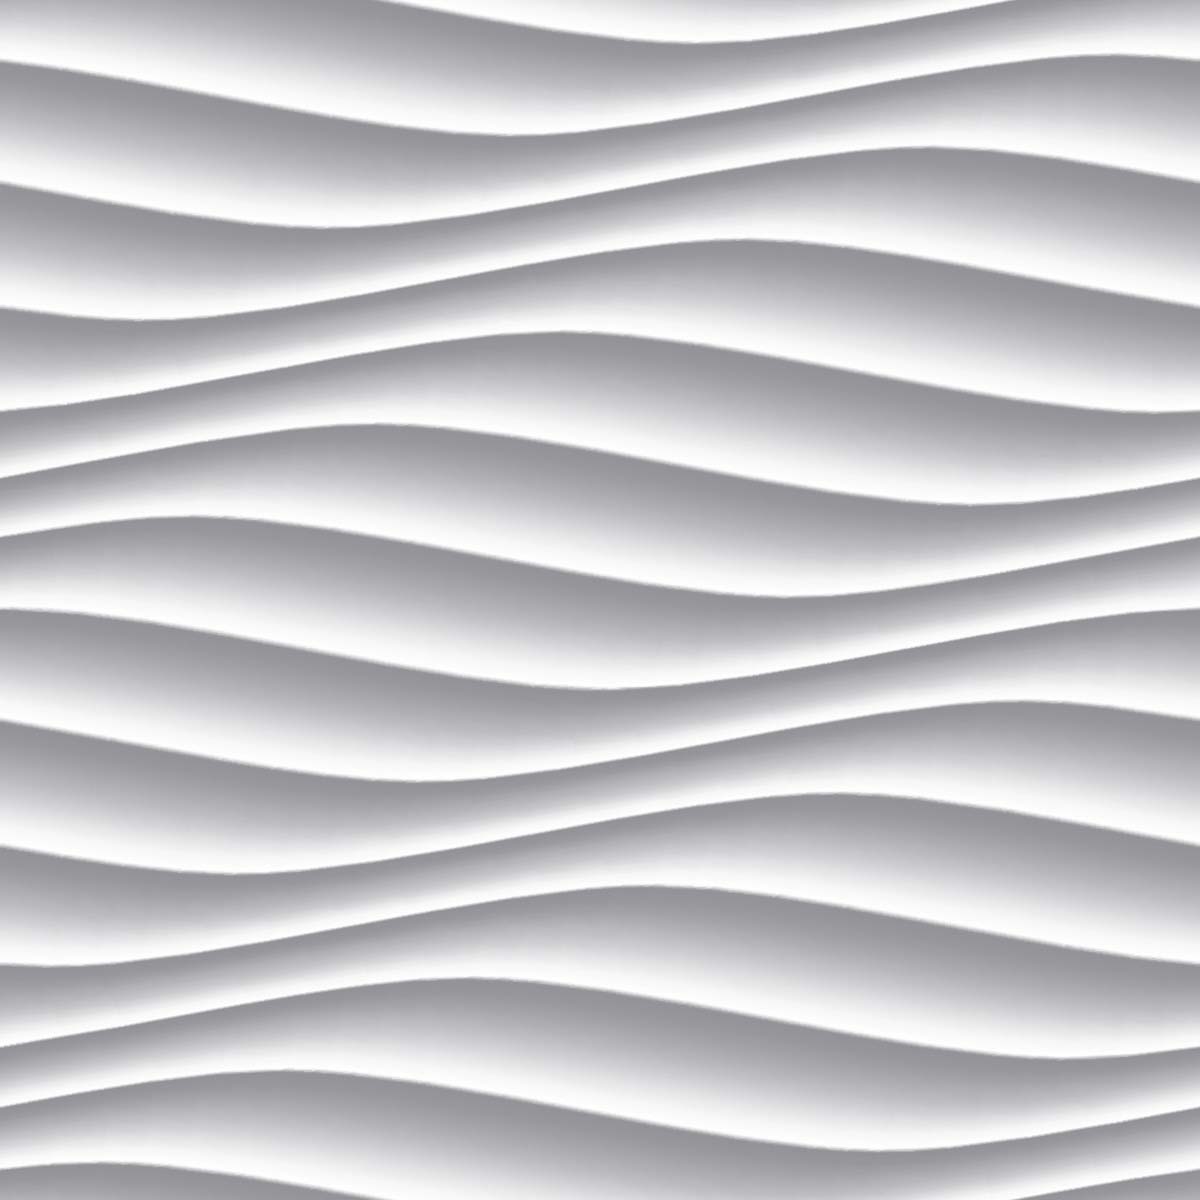 A white and grey wavy pattern